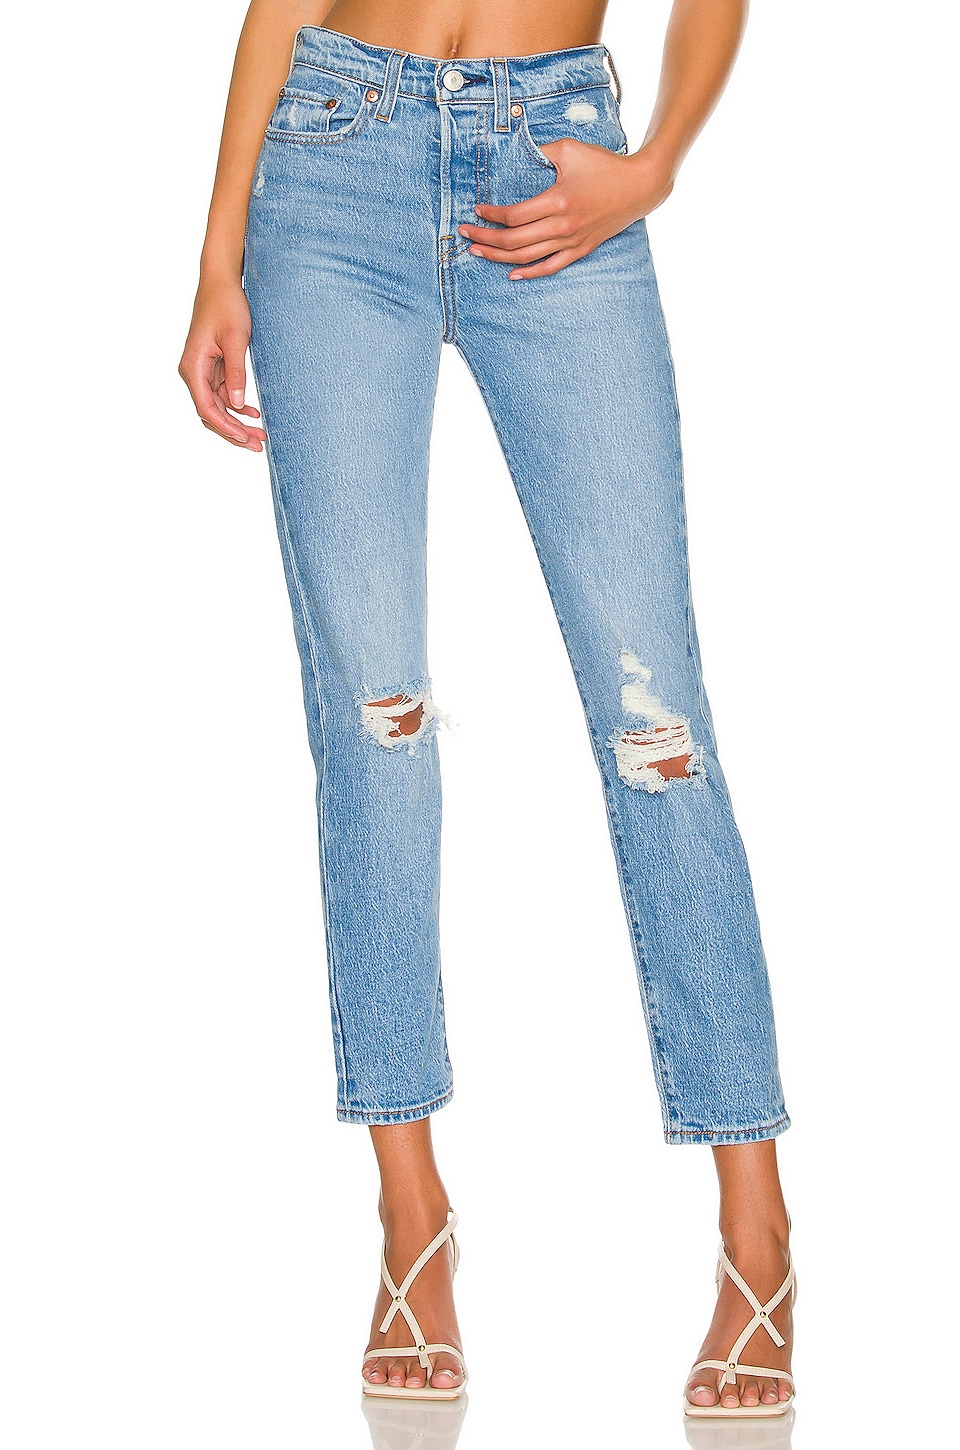 LEVI'S Wedgie Icon Fit in Jazz Devoted | REVOLVE